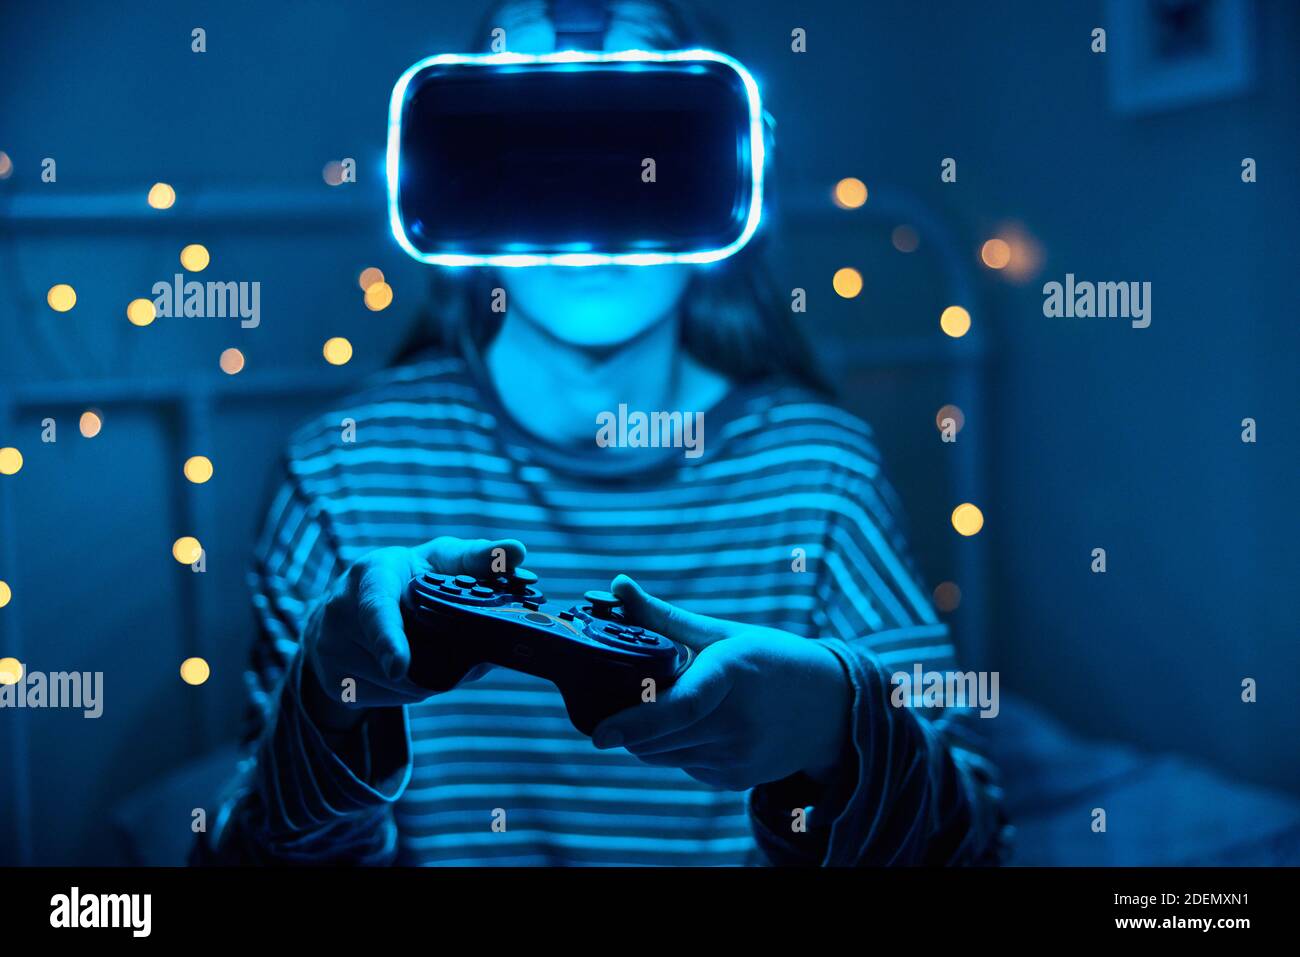 Teenage Girl Playing Video Game At Home In Bedroom Wearing Virtual Reality Headset At Night Stock Photo